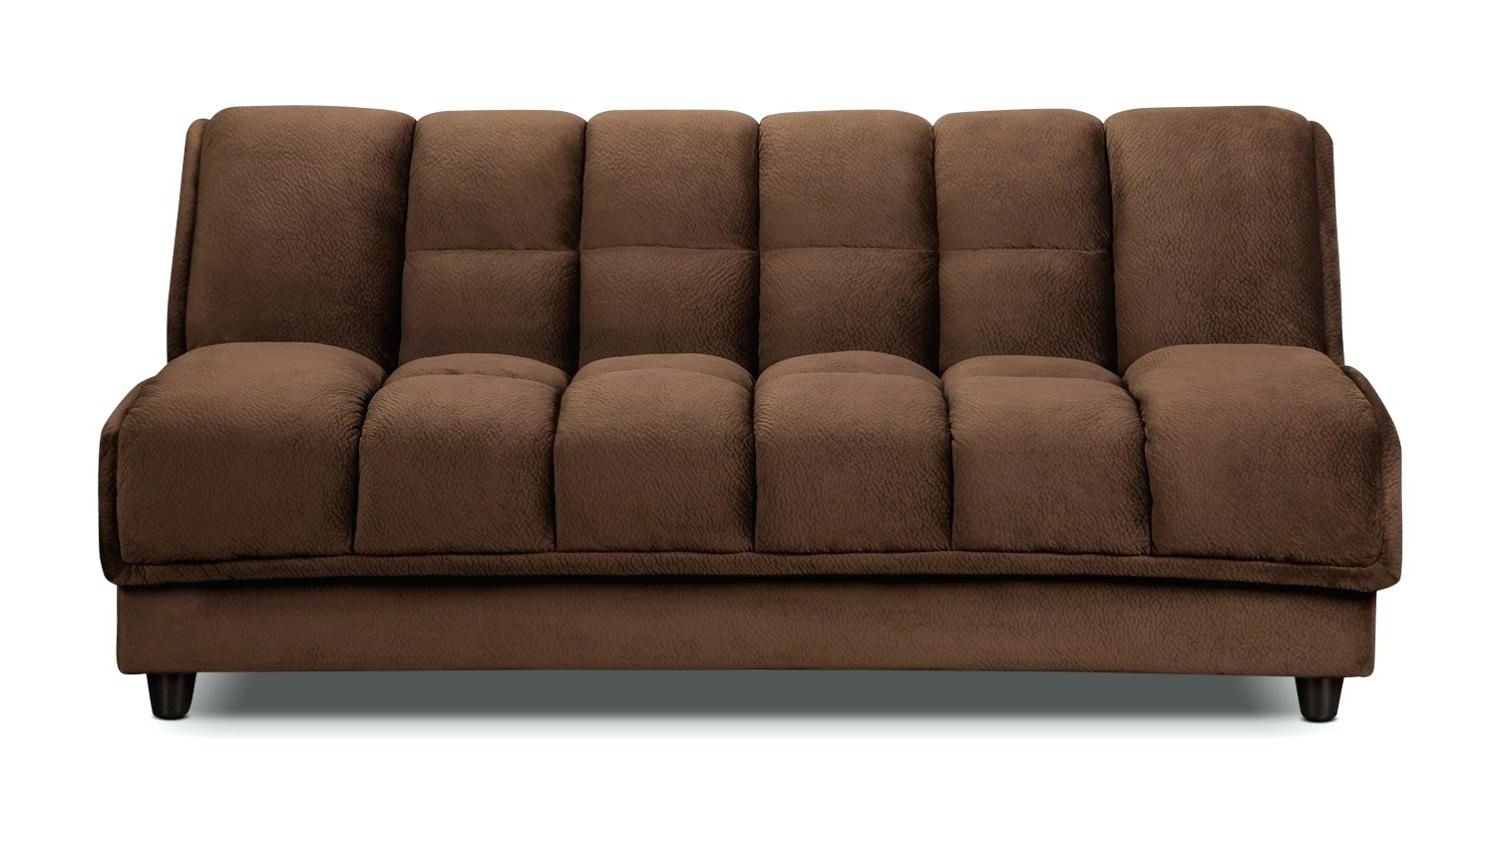 City Sofa Beds Intended For Most Recently Released City Furniture Sofa Beds Futon Bed With Storage Hazelnut Value (View 14 of 20)